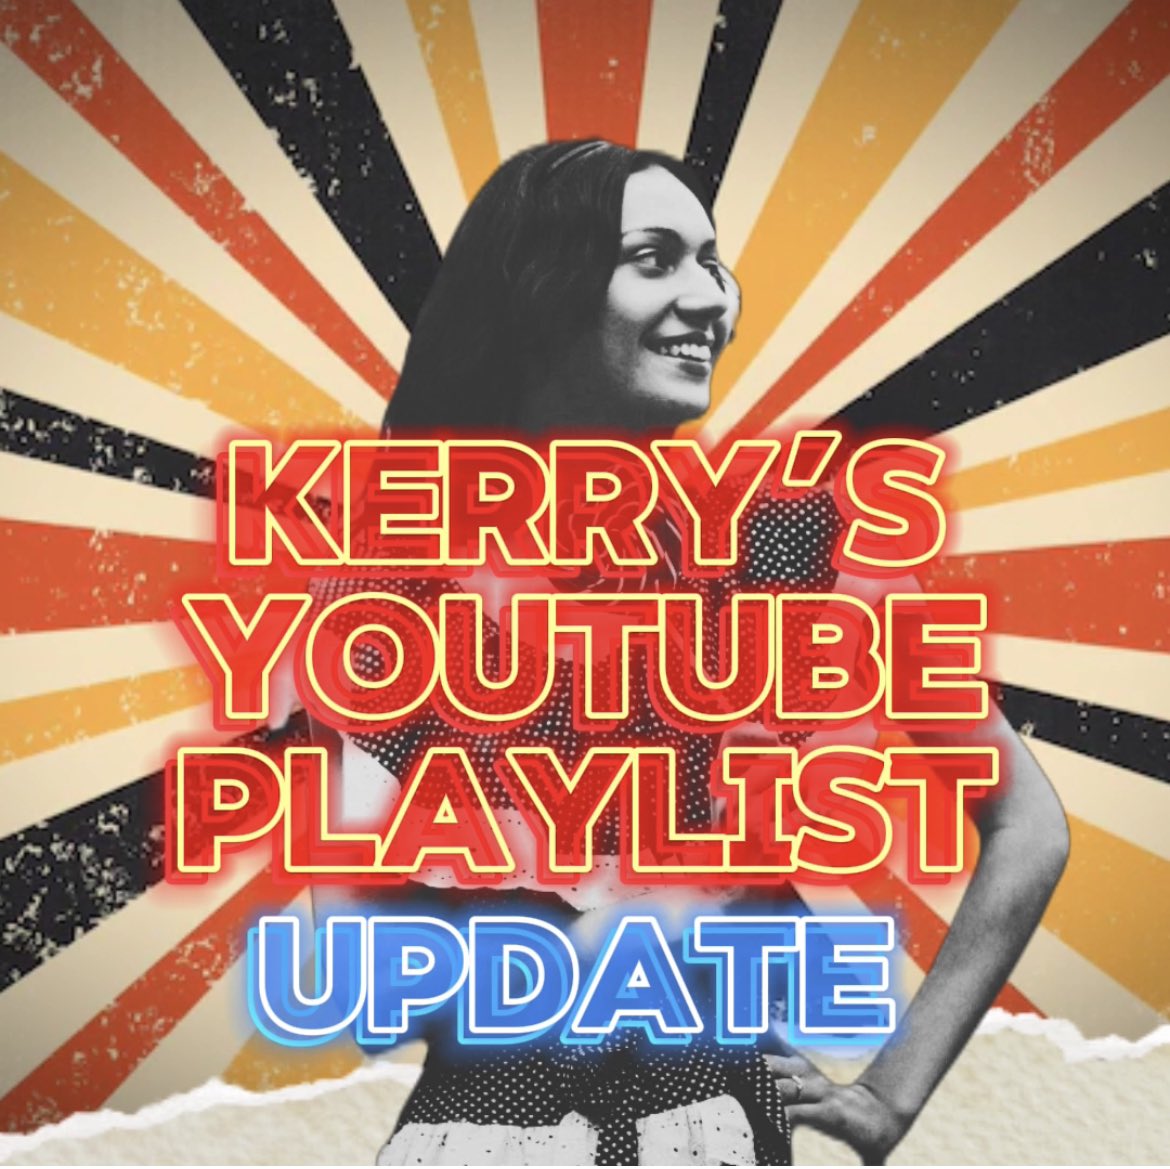 Hey guys, it’s KERRY! 😍

Let’s update my YouTube playlist! 

youtube.com/playlist?list=…

Drop your links! Let me dive into your tunes 🫠🫠🫠

#youtubeplaylist #playlist #playlistcurator #indiemusicians